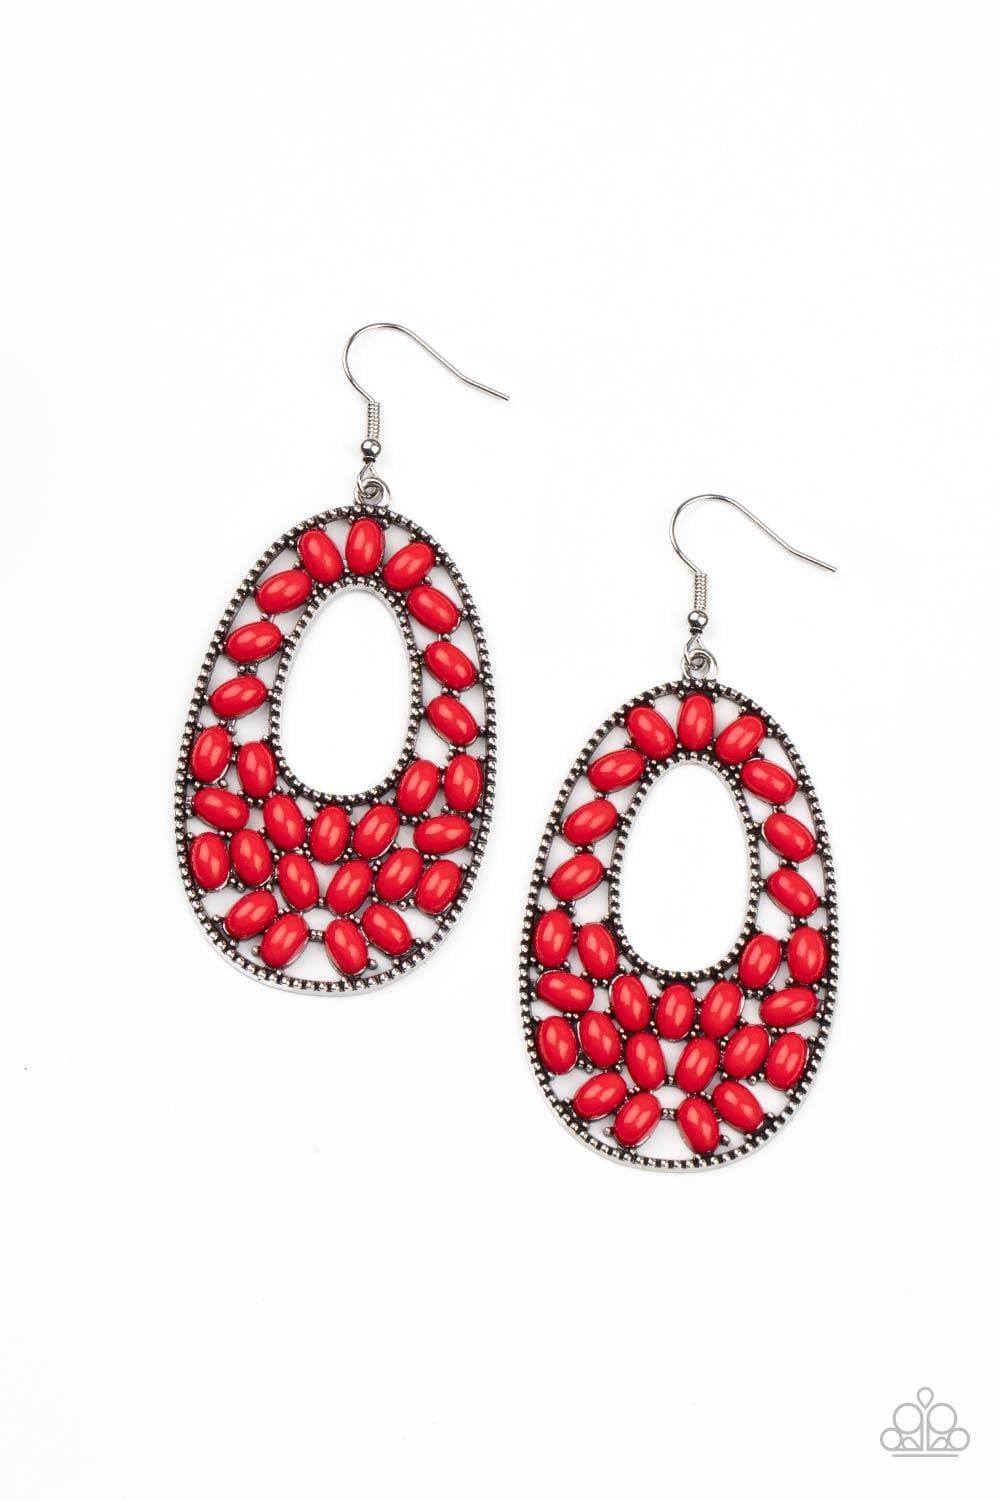 Paparazzi Accessories - Beaded Shores - Red Earrings - Bling by JessieK